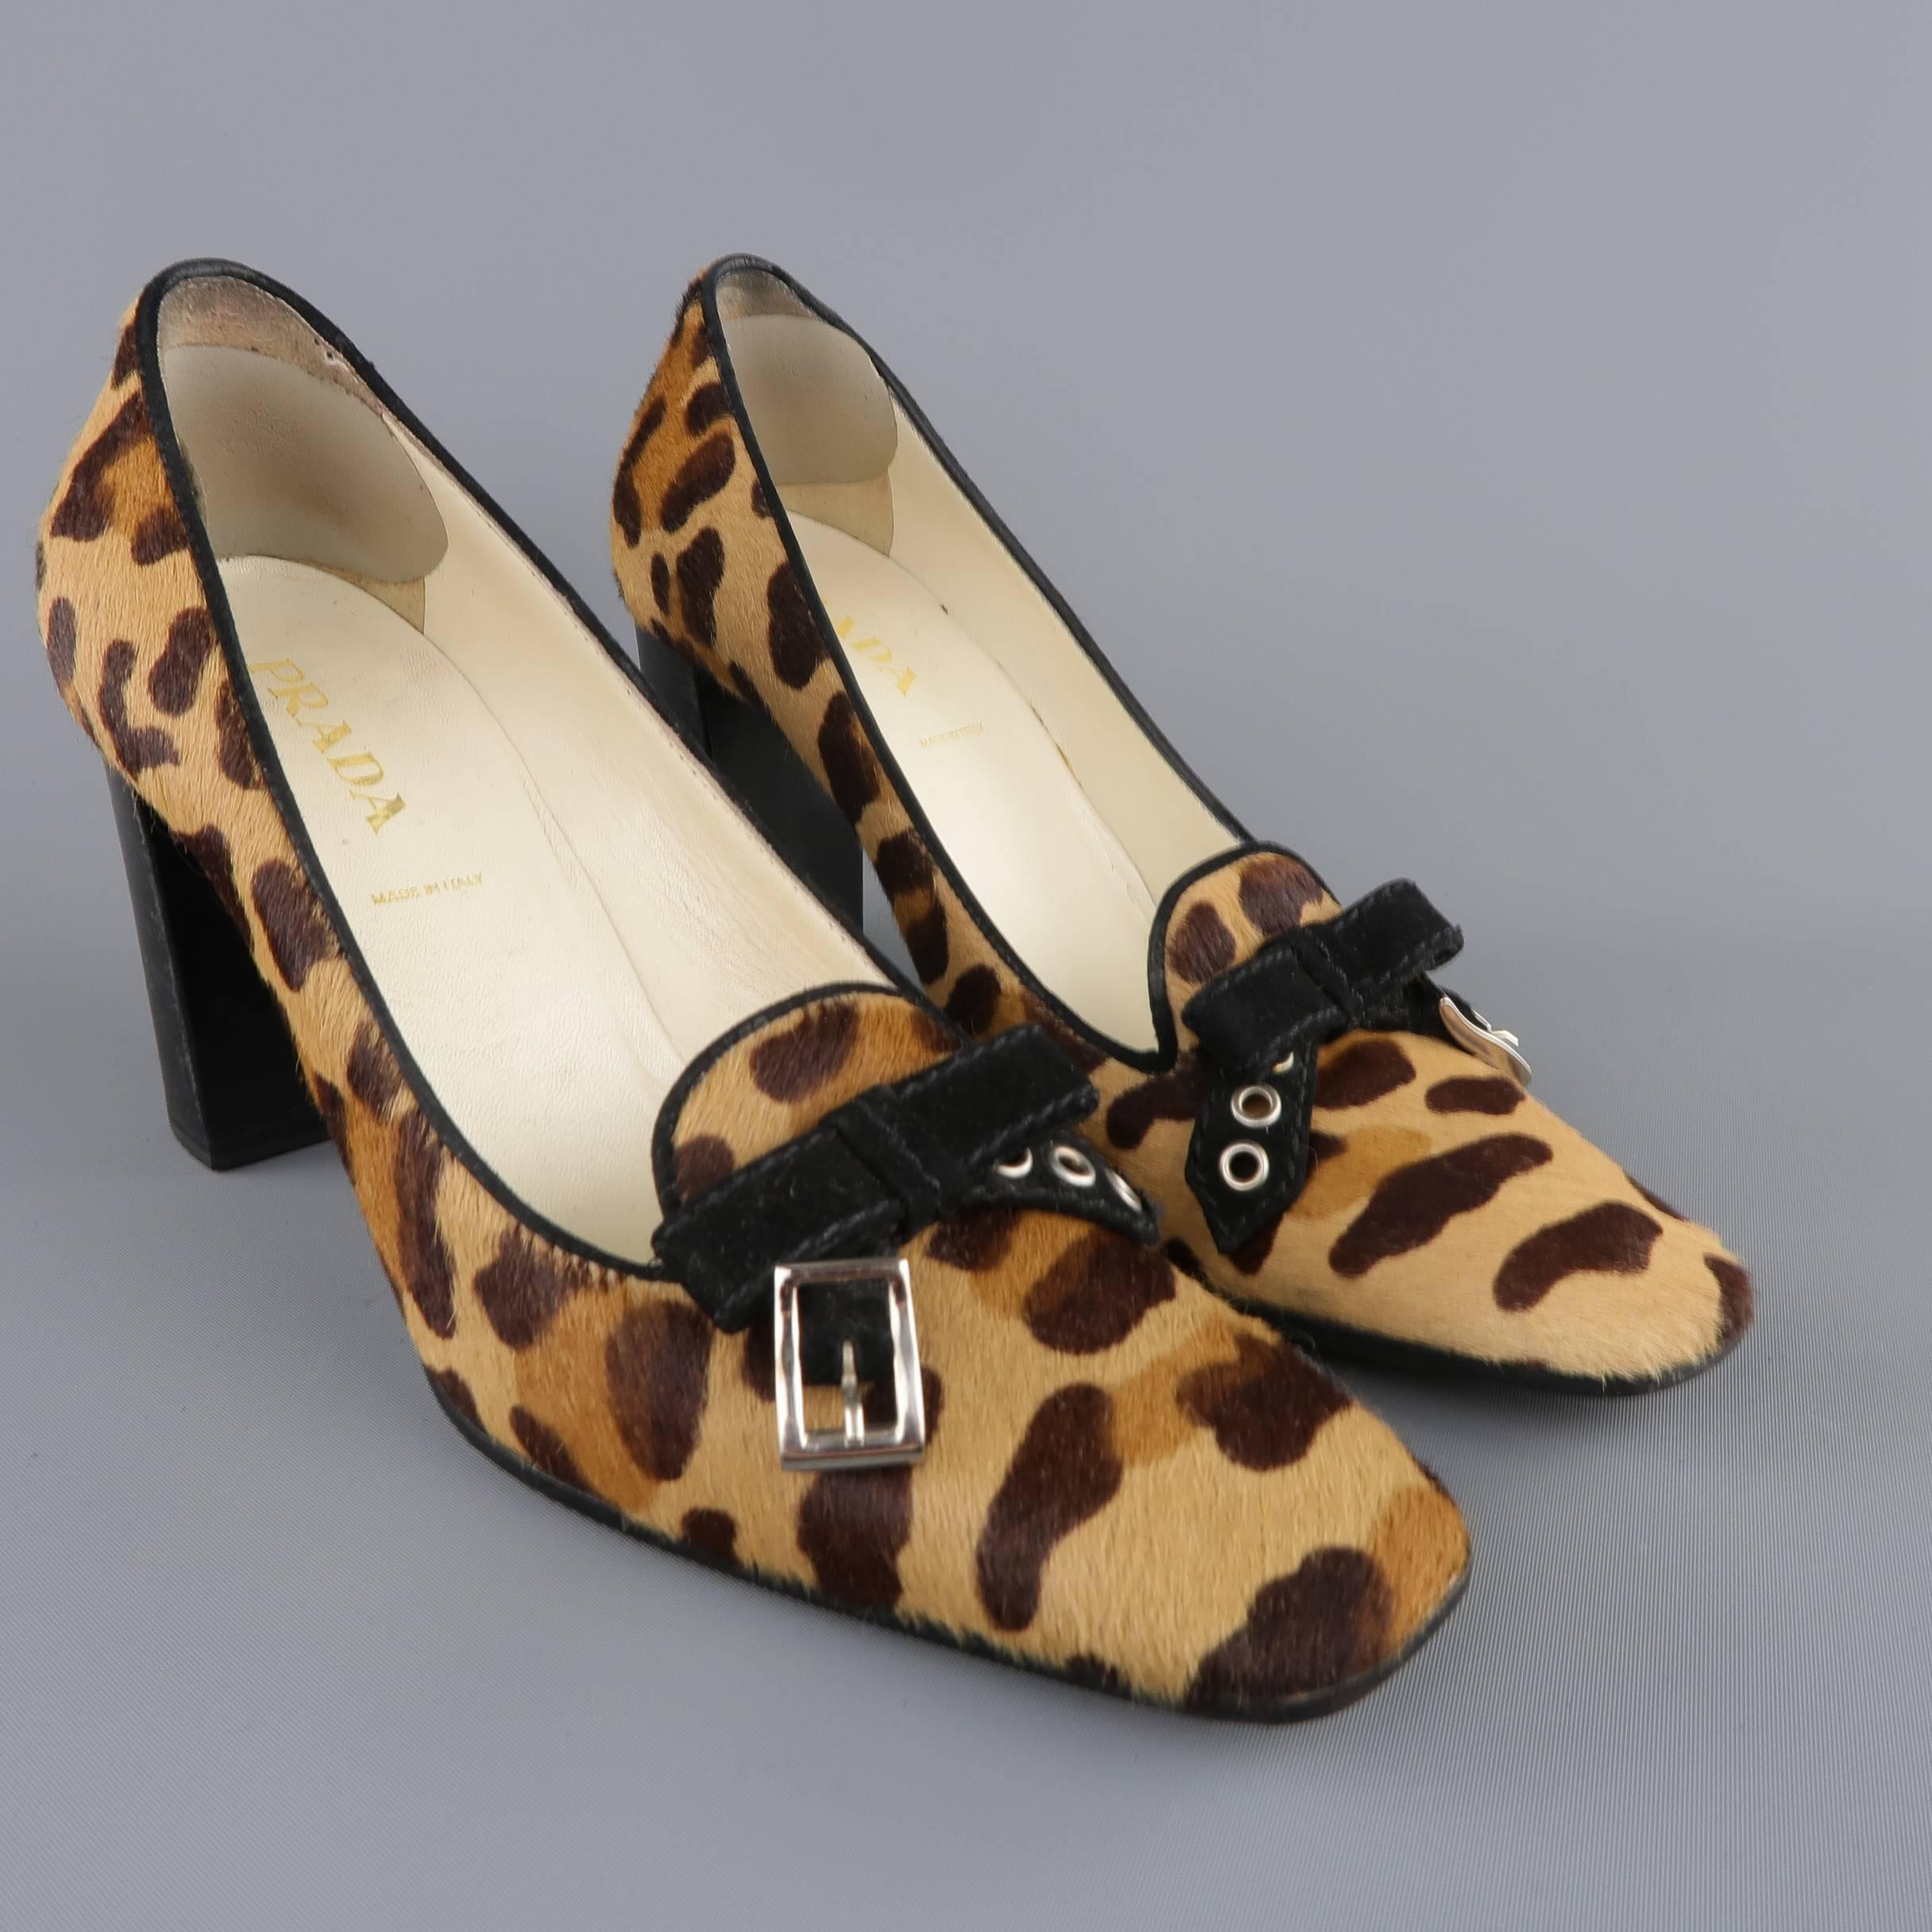 PRADA pumps come in tan leopard cheetah print ponyhair leather and feature a laofer toe line with black piping, squared off pointed toe with tied belt buckle bow, and chunky stacked heel. Wear throughout leather. As-Is. With box. Made in Italy.
